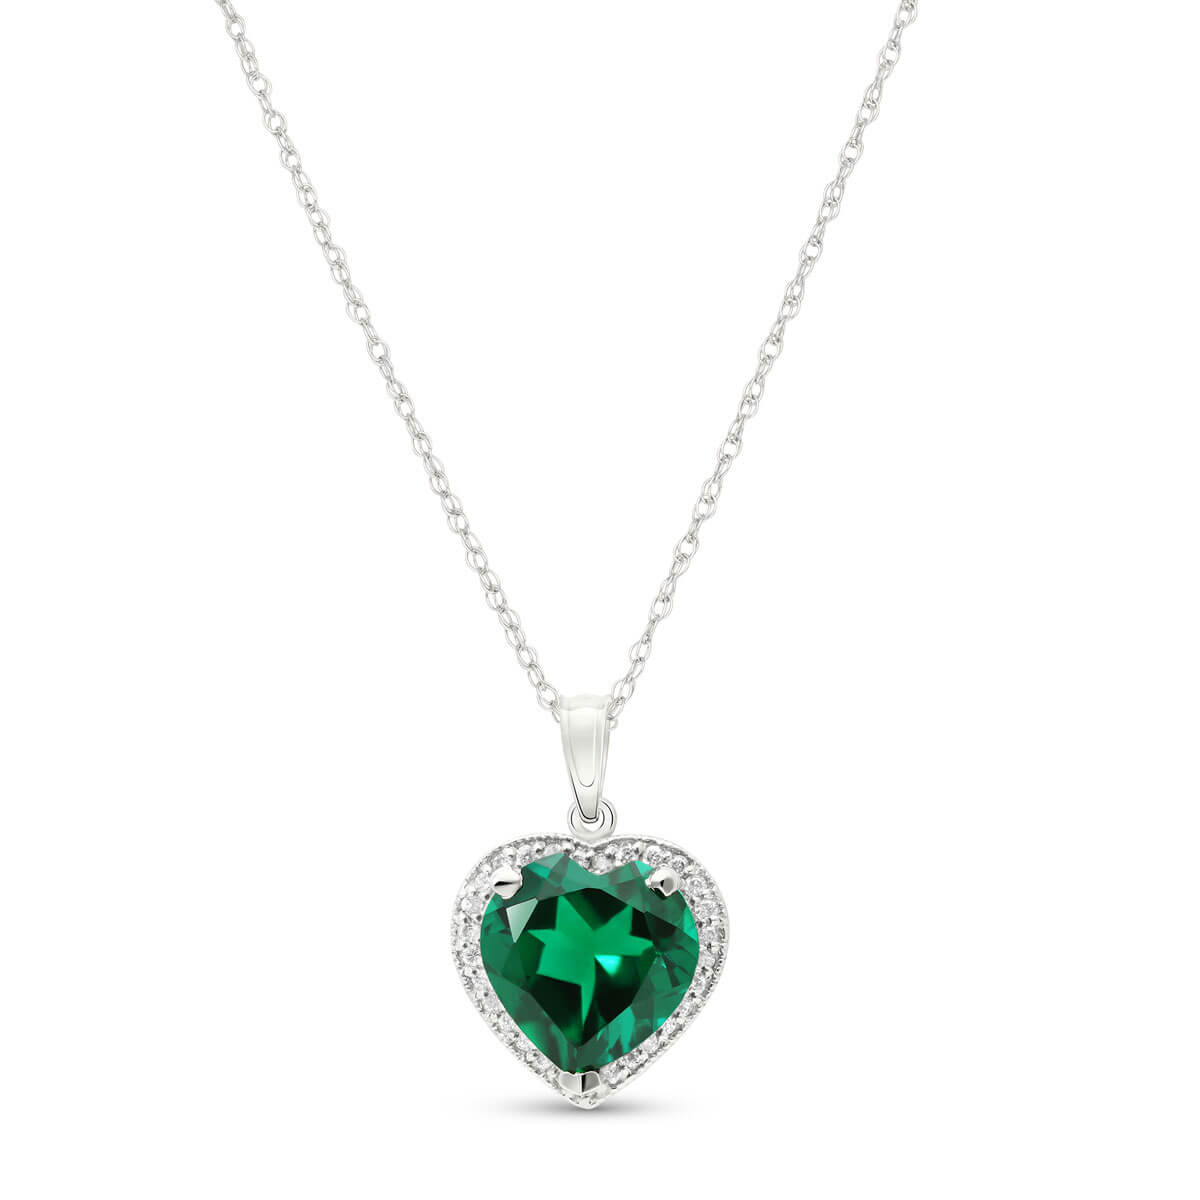 Lab Grown Emerald & Diamond Halo Pendant Necklace 2.89 ctw in 9ct White Gold